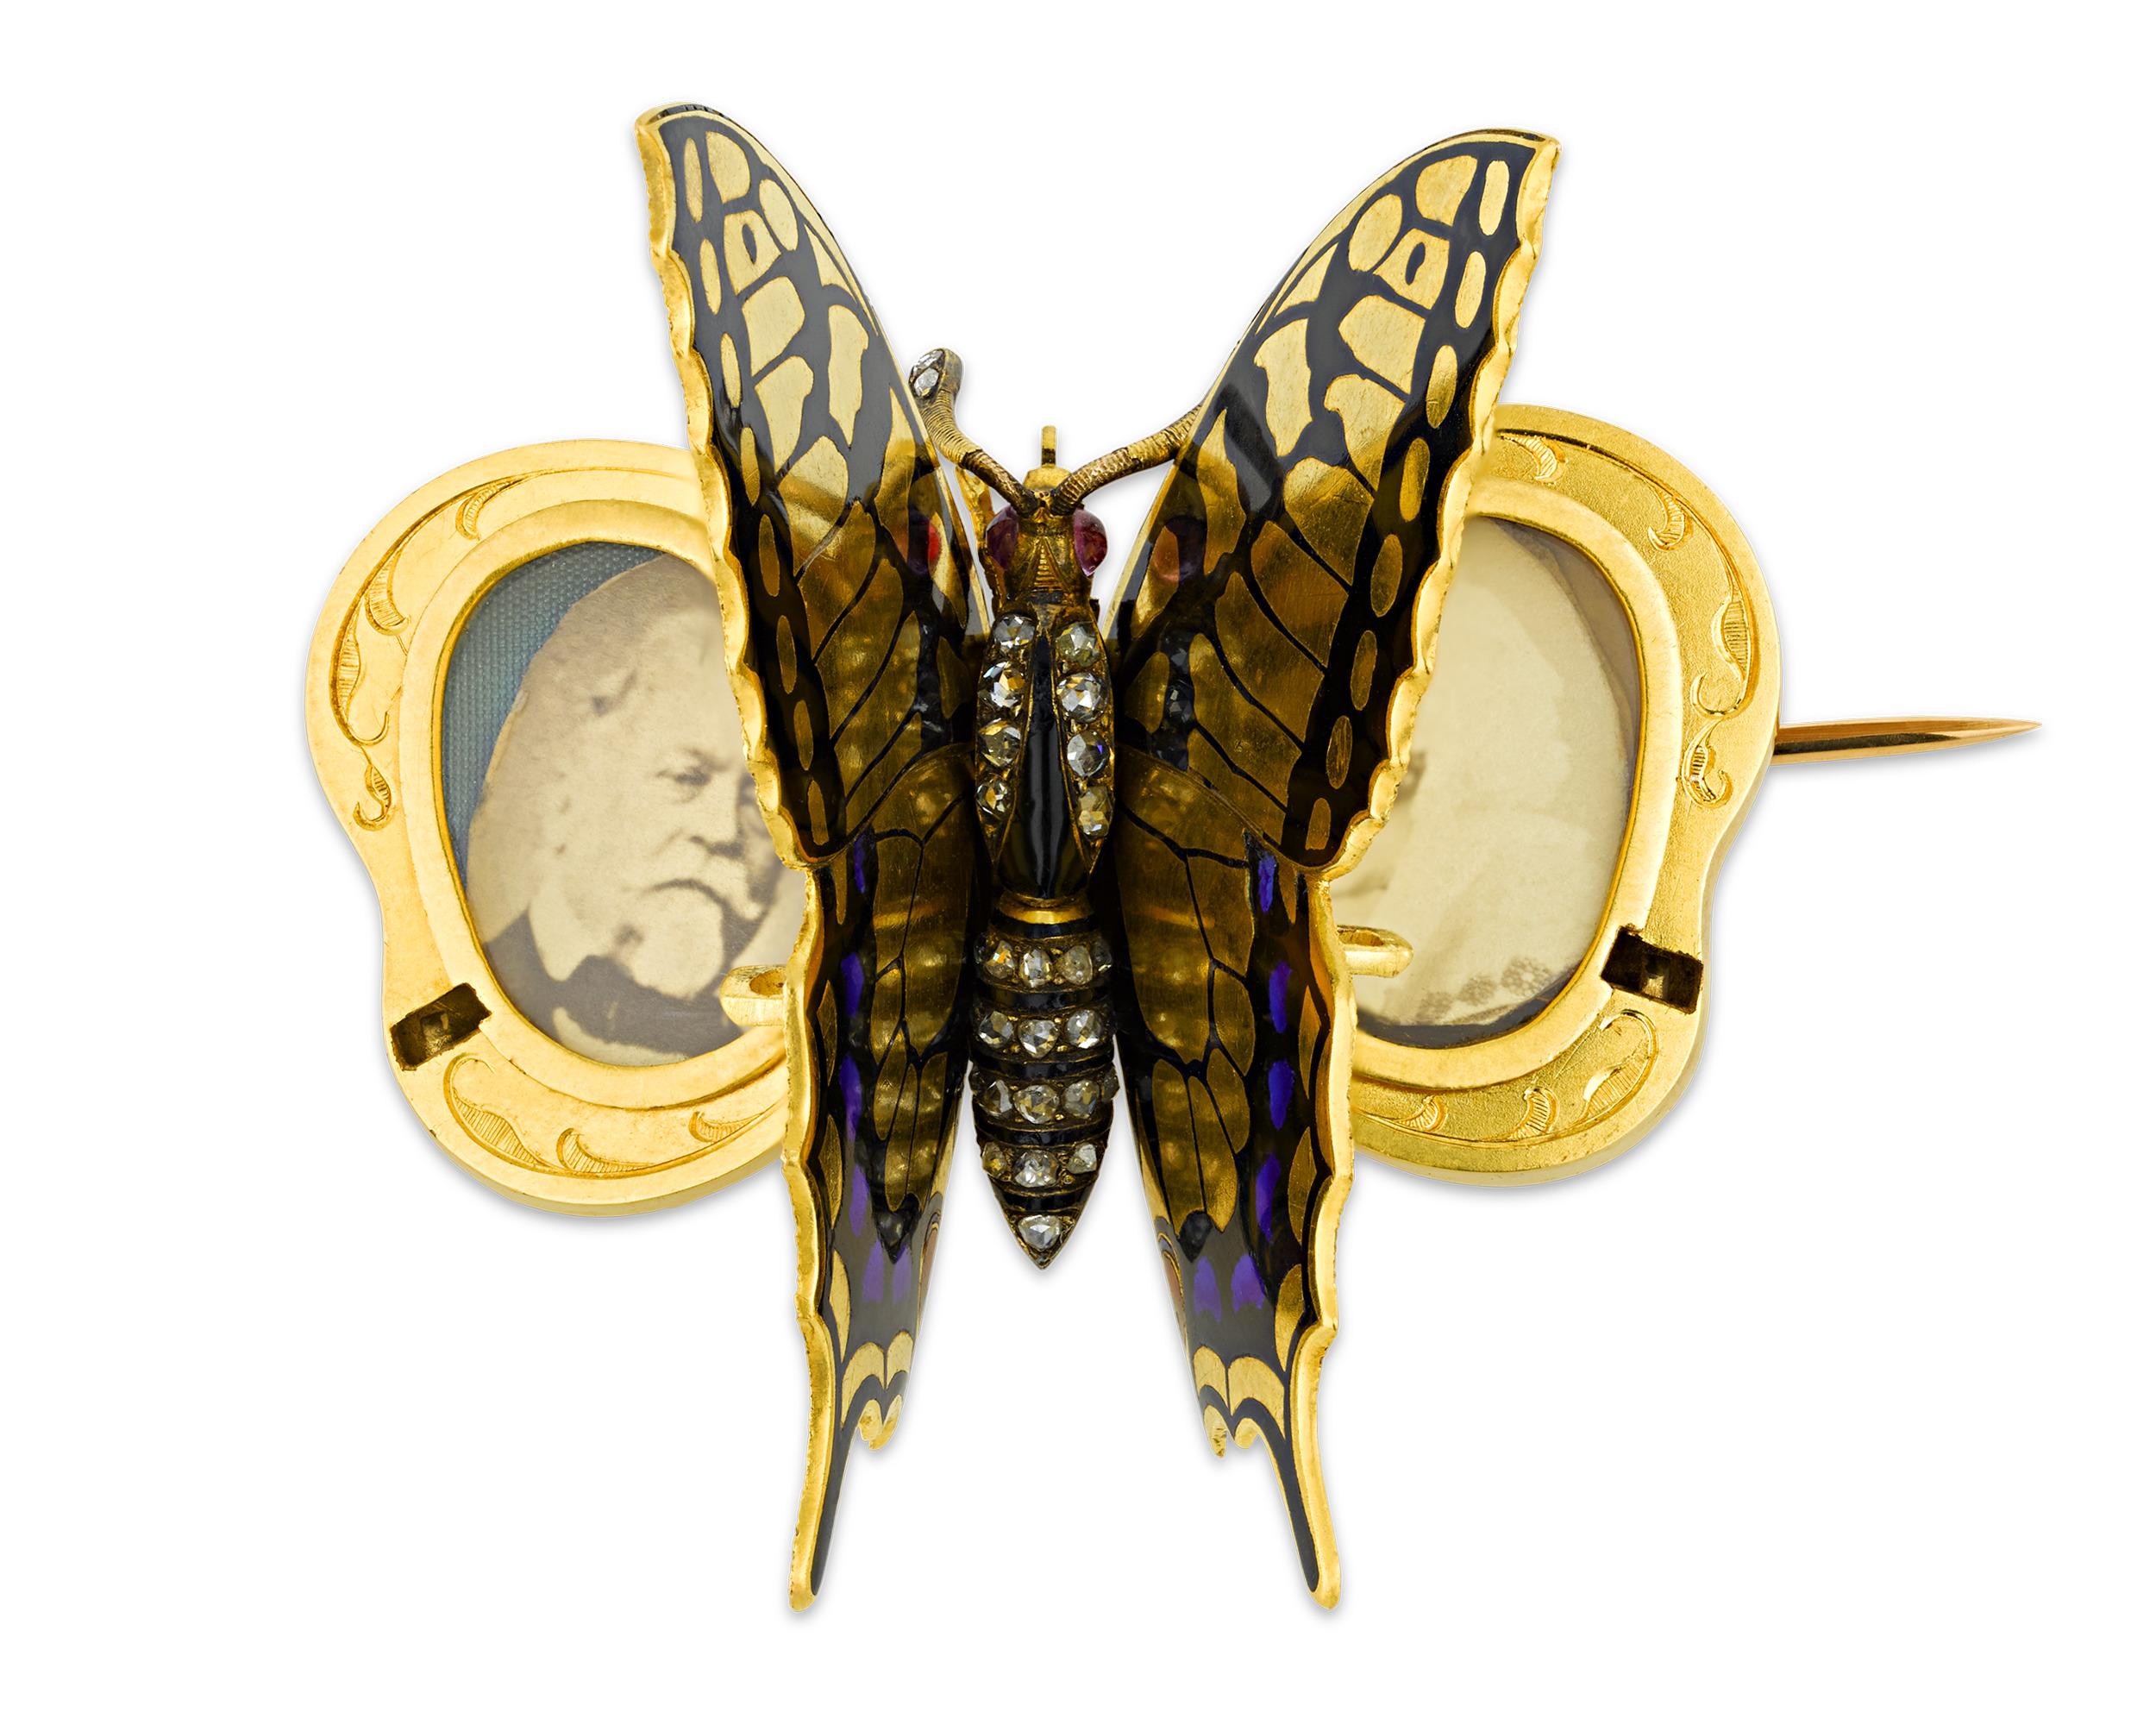 This extraordinary butterfly brooch, crafted of gold, enamel and diamonds, hides a secret within. The colorful hinged wings spring open to reveal a double locket. The 19th-century brooch takes the form of a highly naturalistic butterfly comprised of